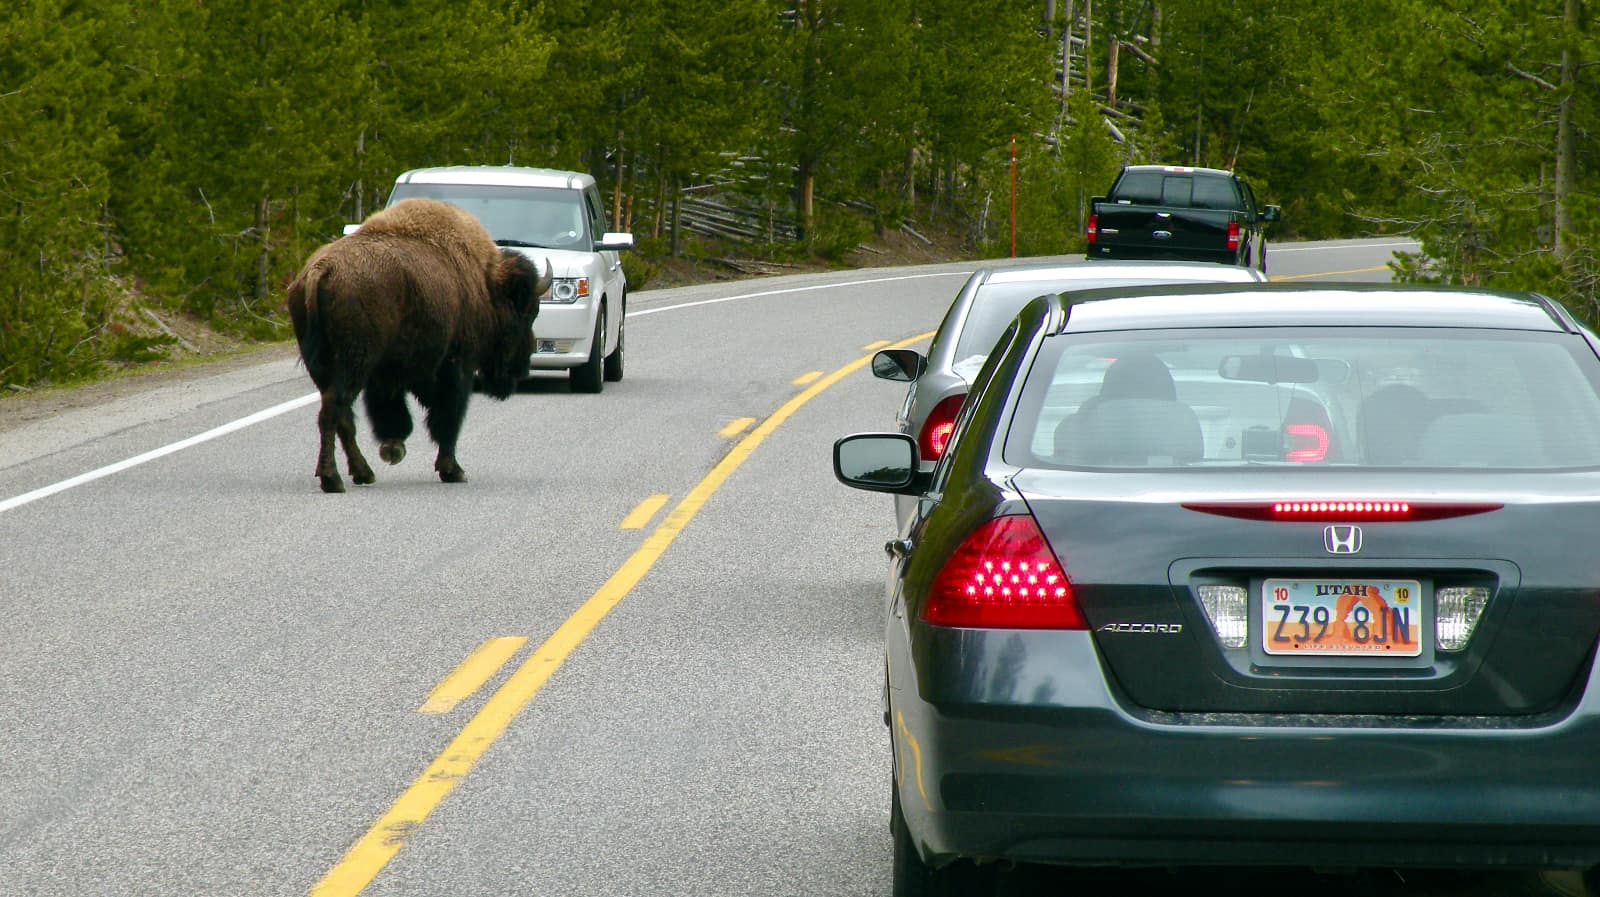 North American bison on roadway with cars in both travel lanes